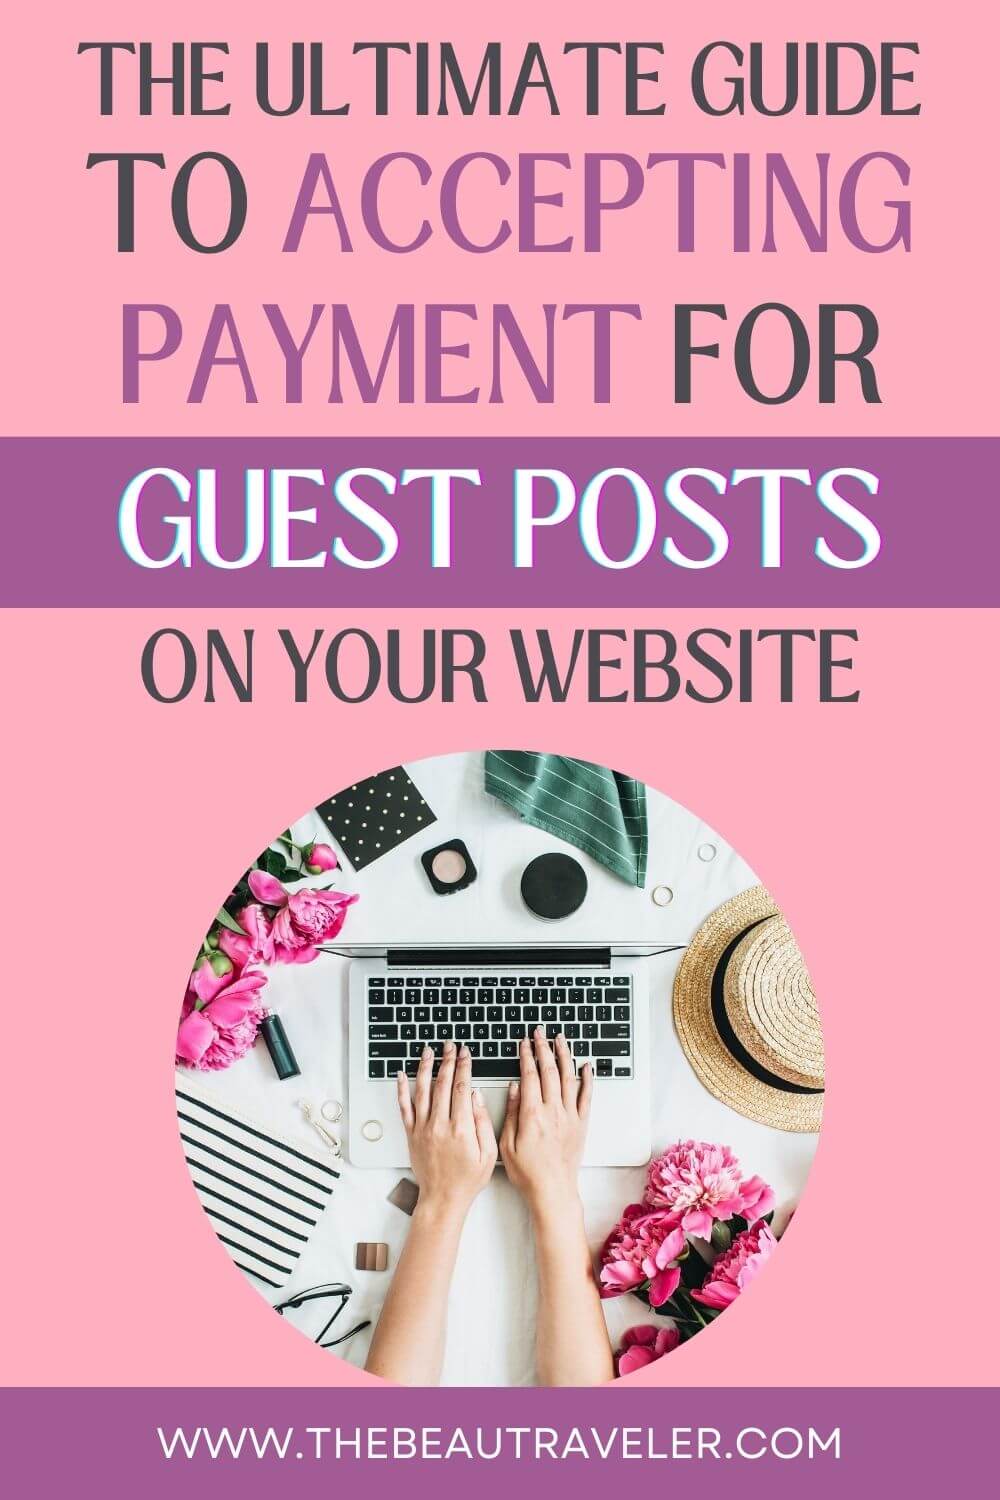 The Ultimate Guide to Accepting Paid Guest Posts on Your Website - The BeauTraveler